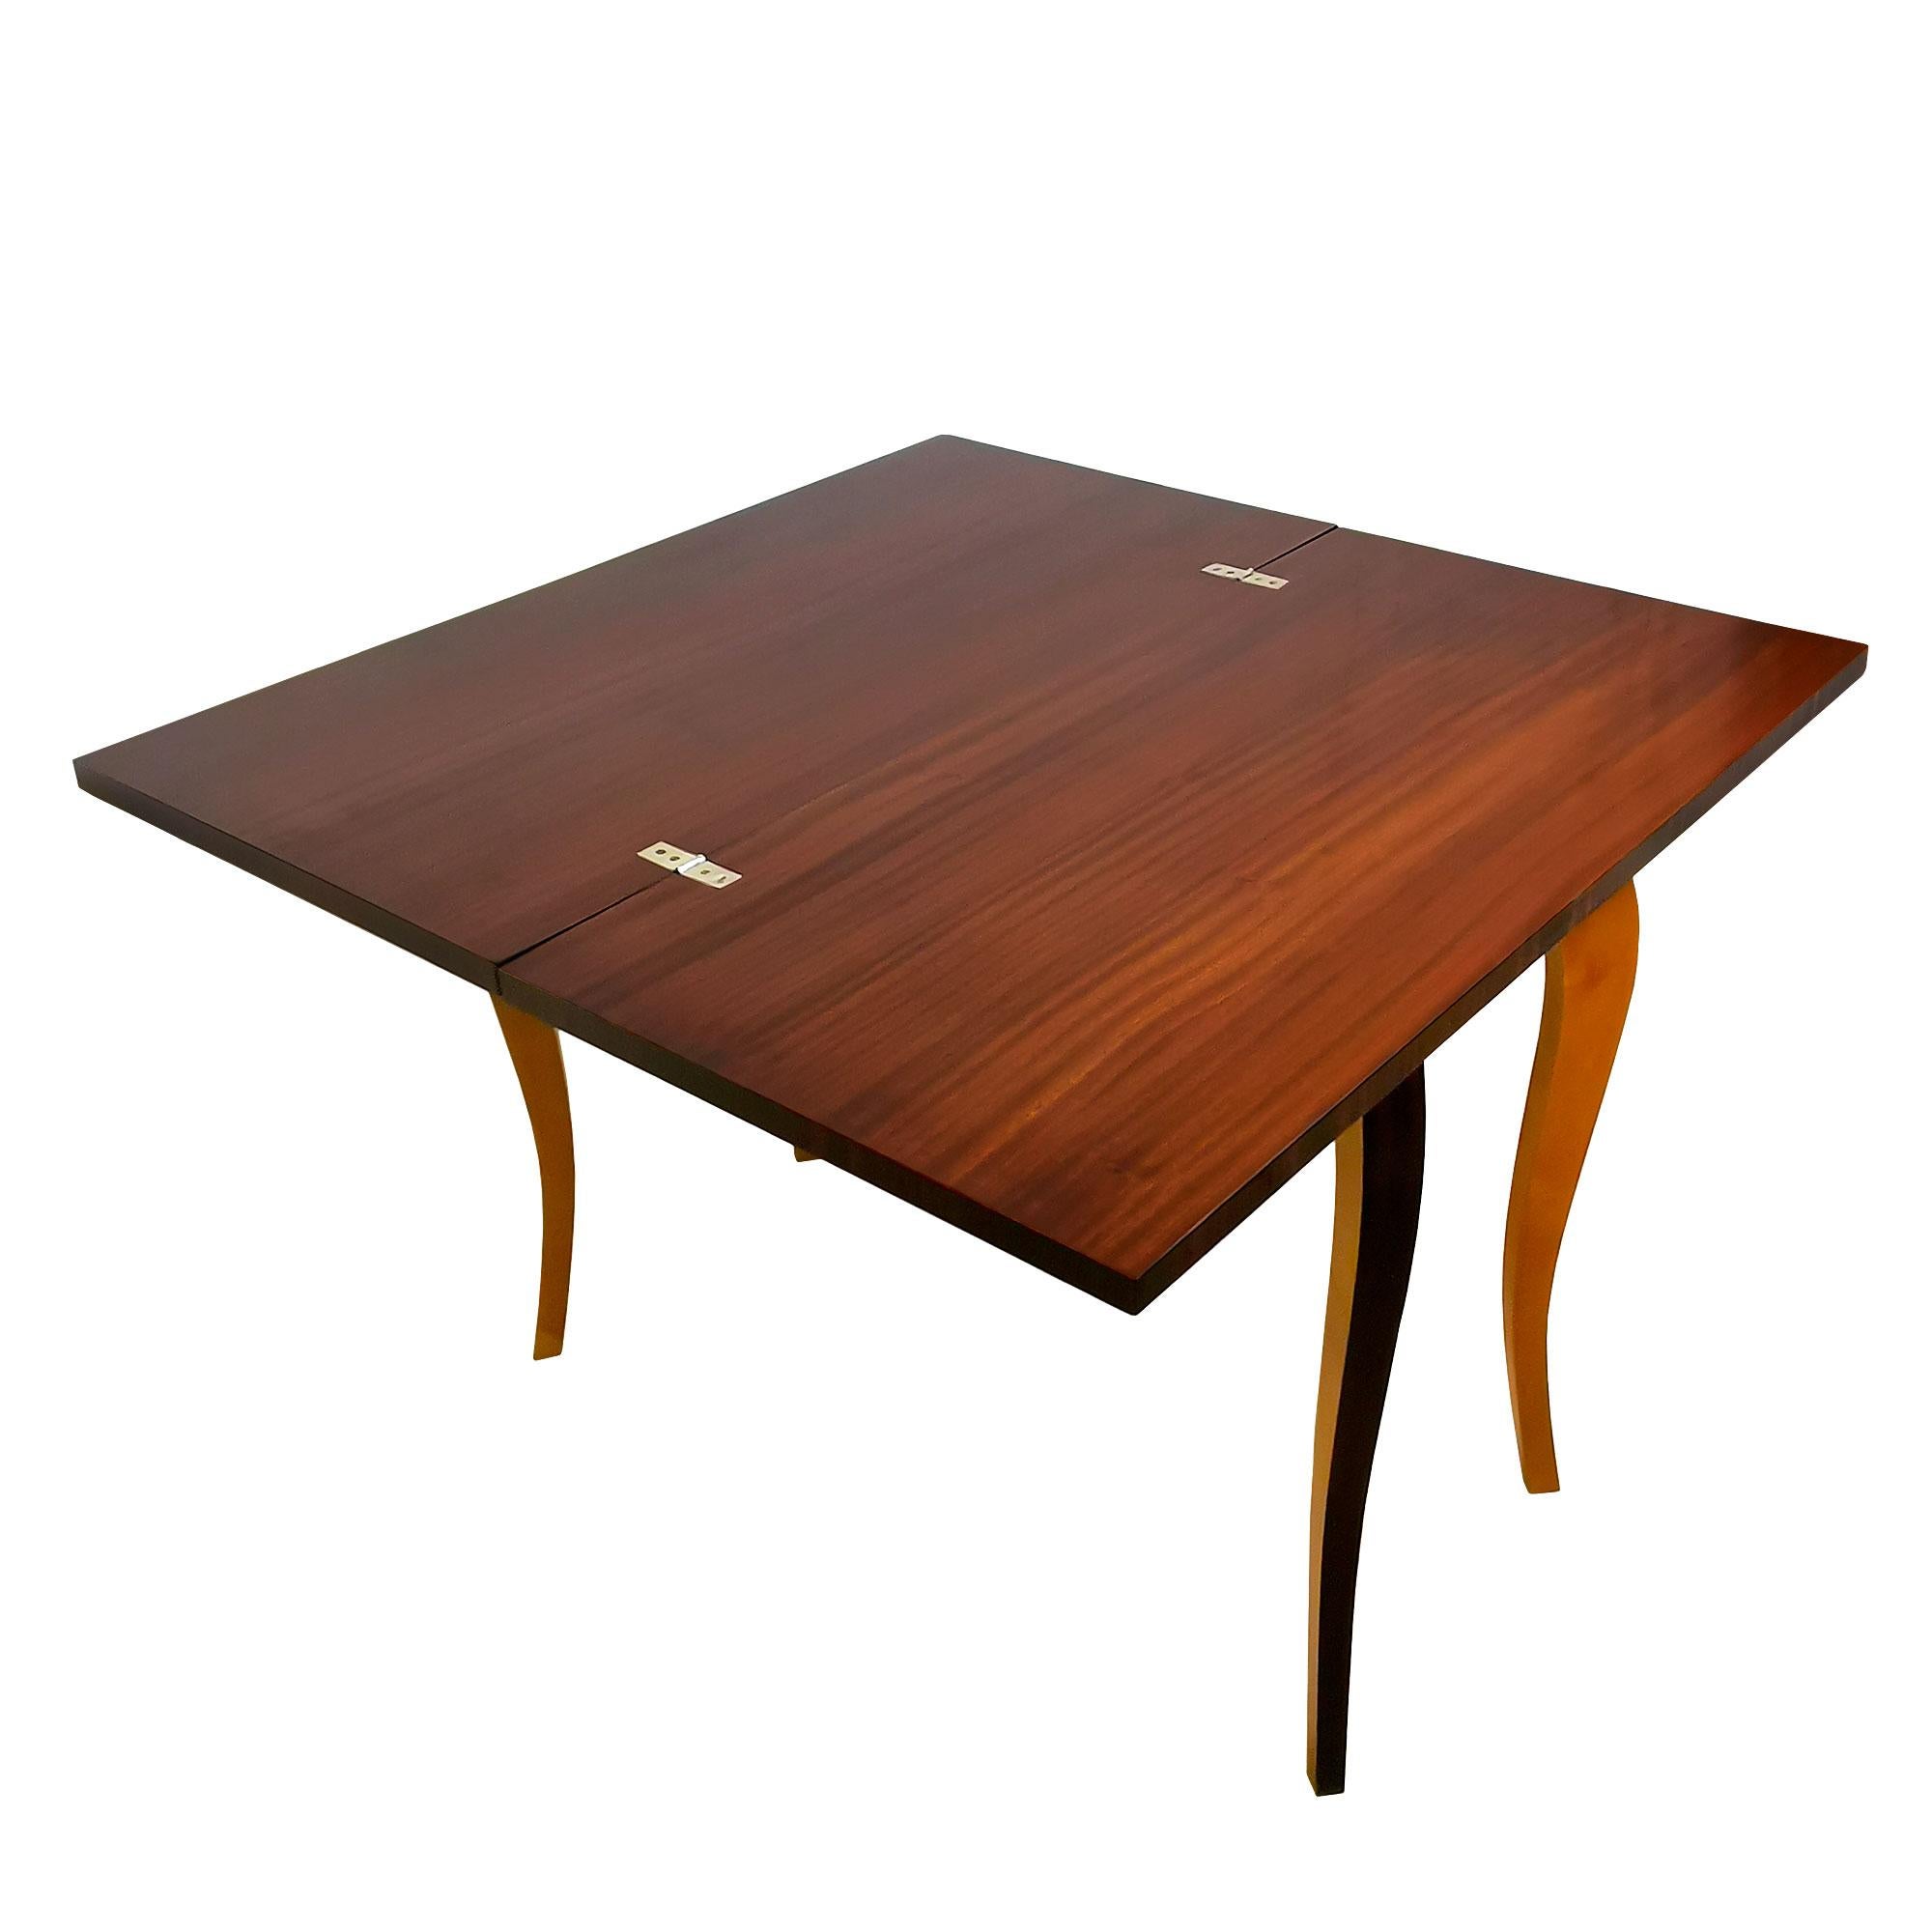 Mid-20th Century Mid-Century Modern Game Table With Double Drop-Leaf Top – France 1940 For Sale